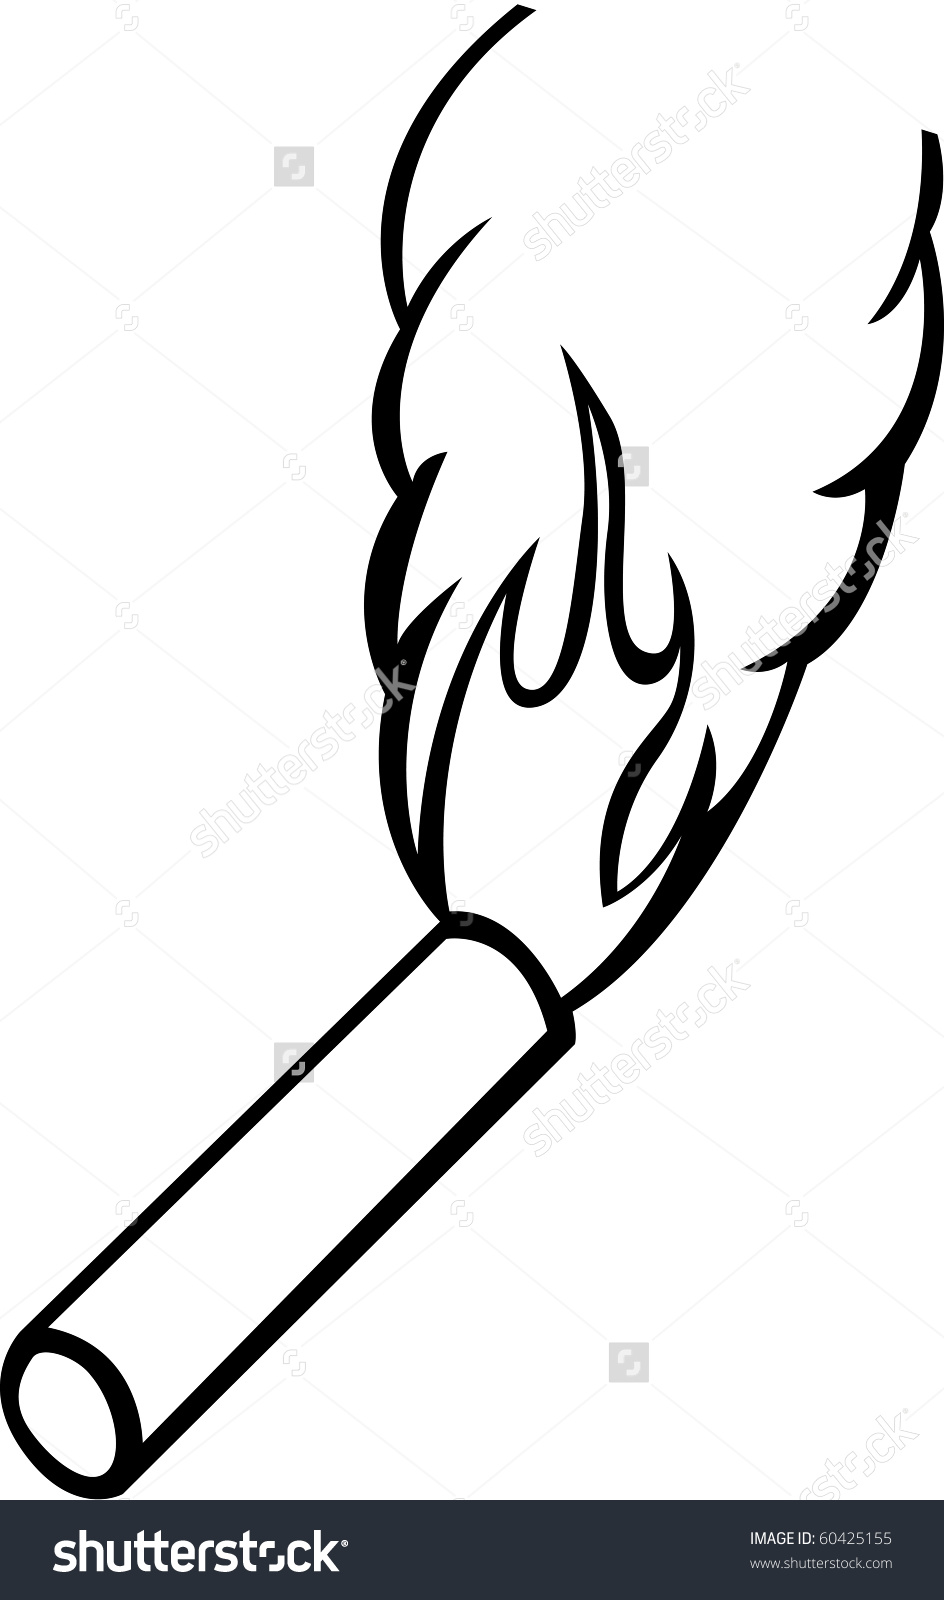 Flaring clipart - Clipground